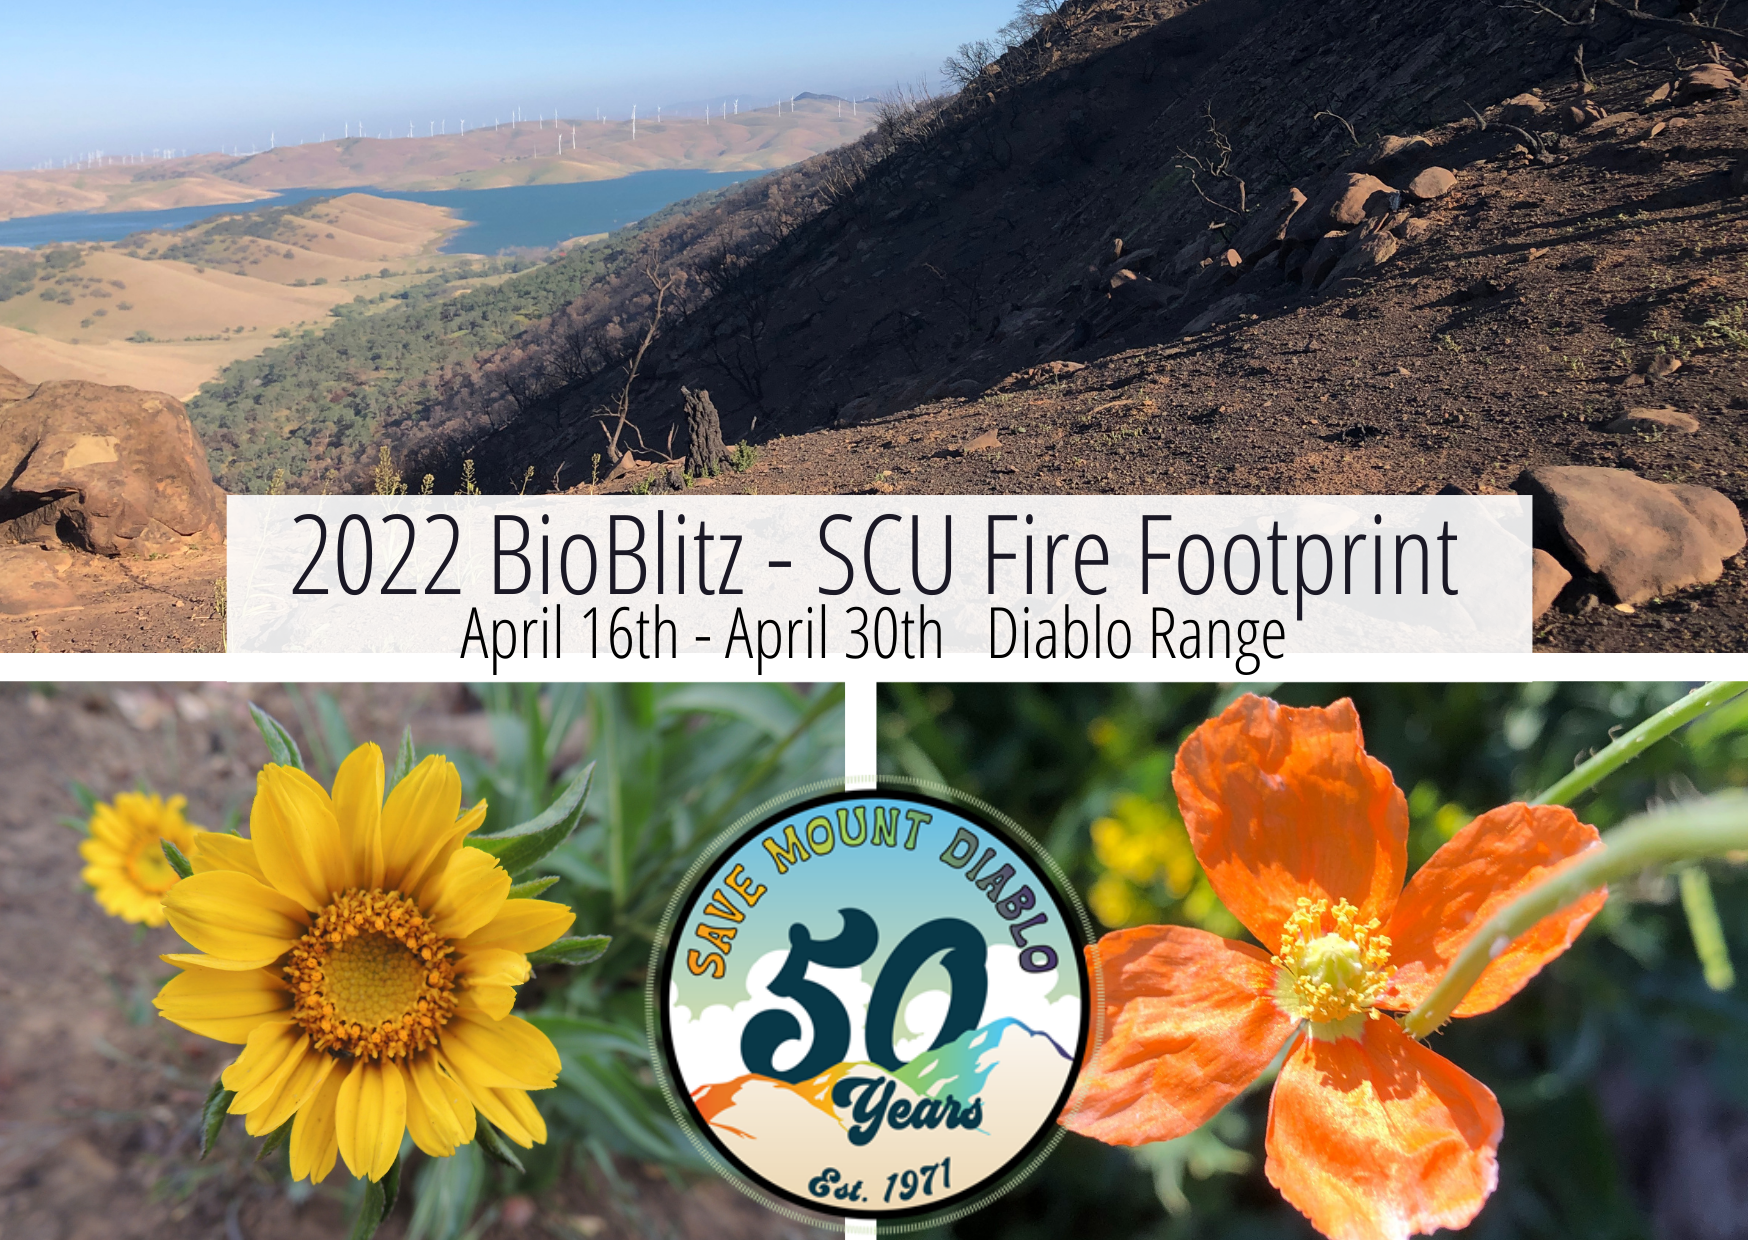 Flyer with photos of a burn scar and wildflowers, and the date of the 2022 BioBlitz